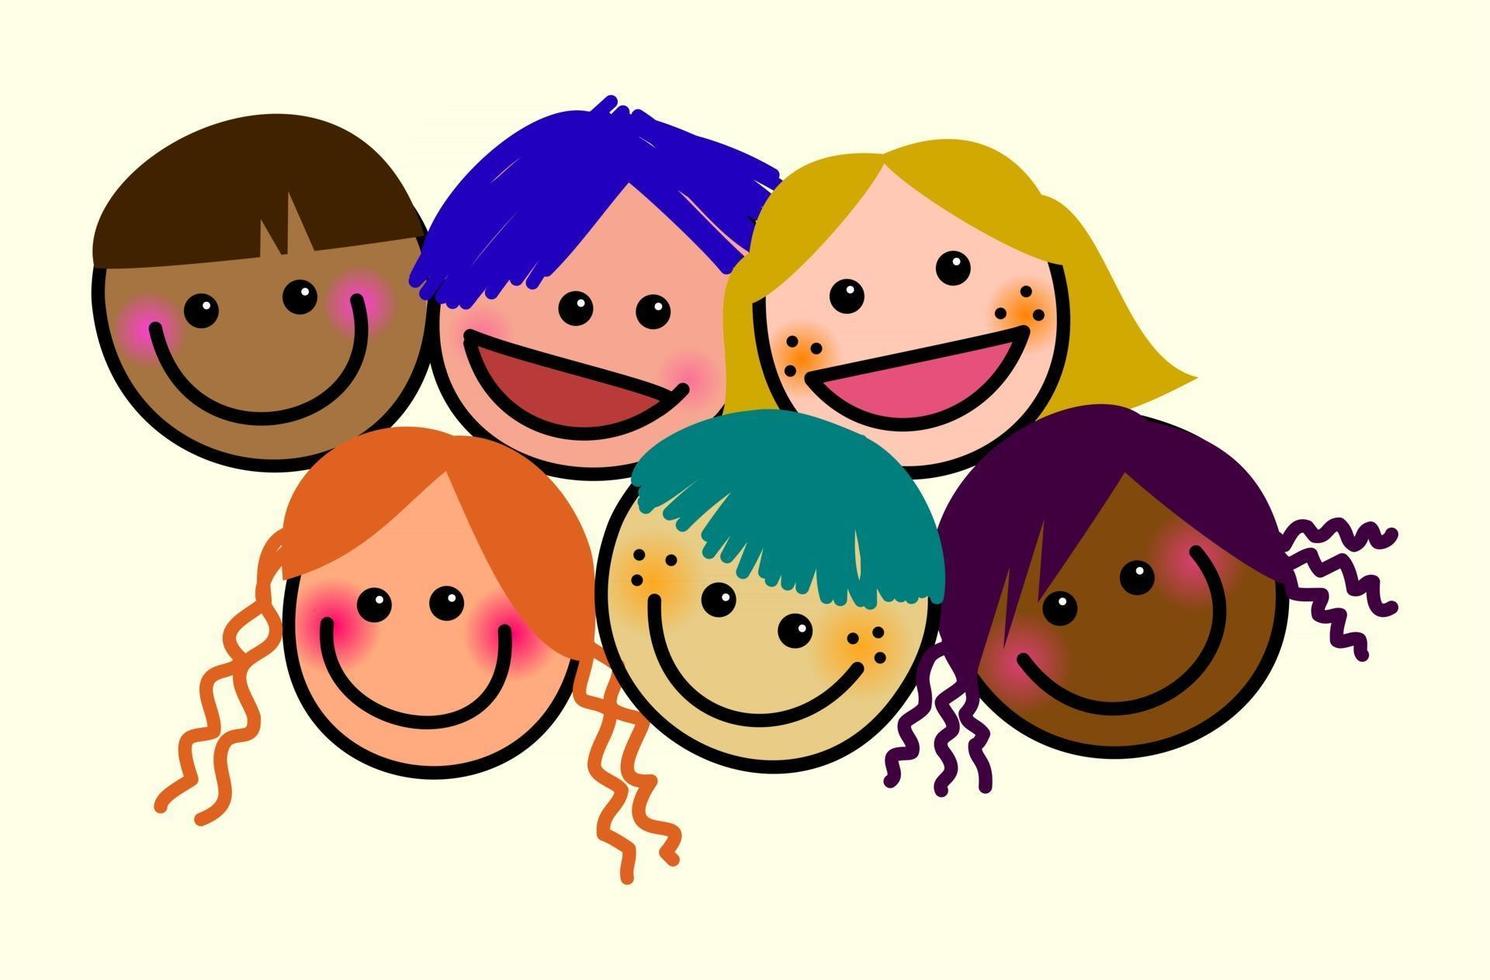 Cute Crowded Kids Faces vector